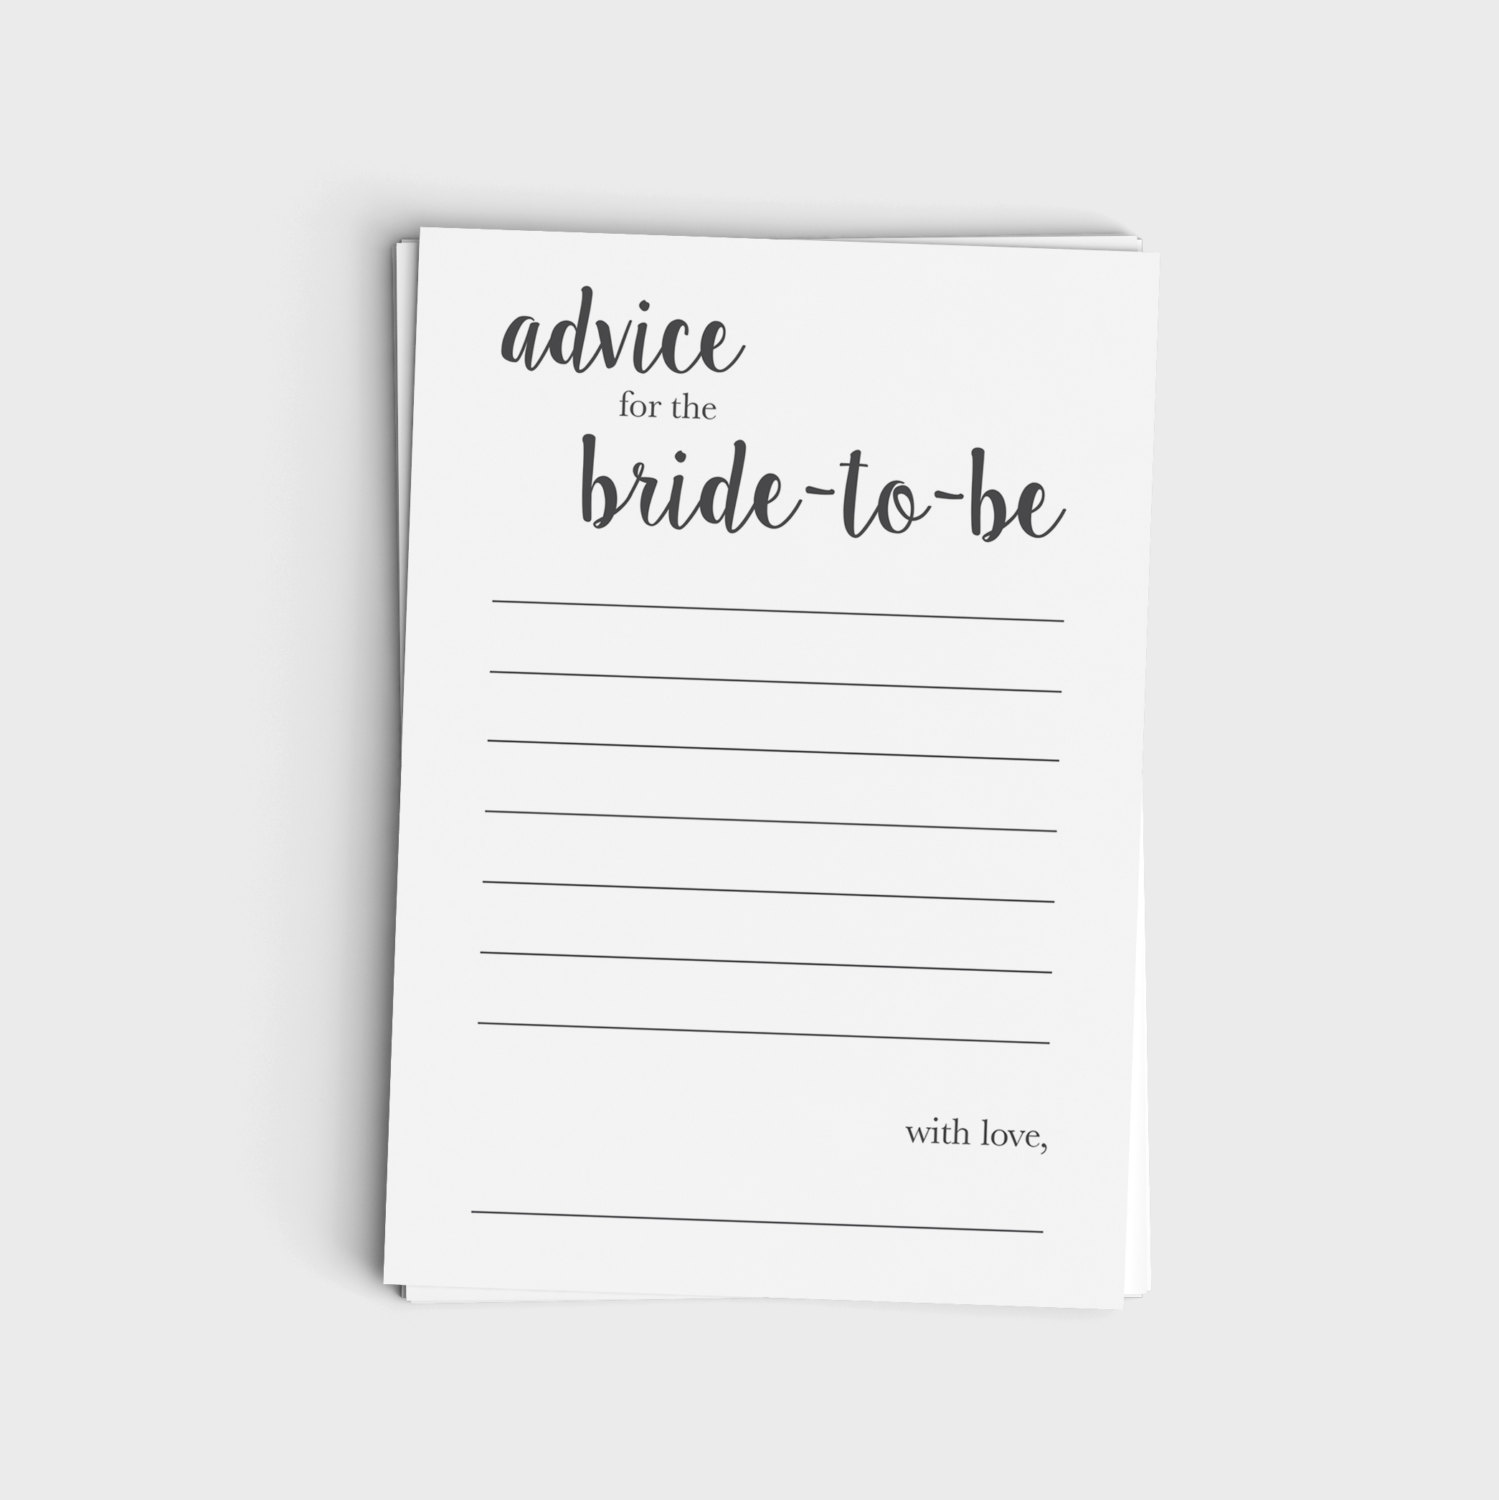 Advice Card for Bride-to